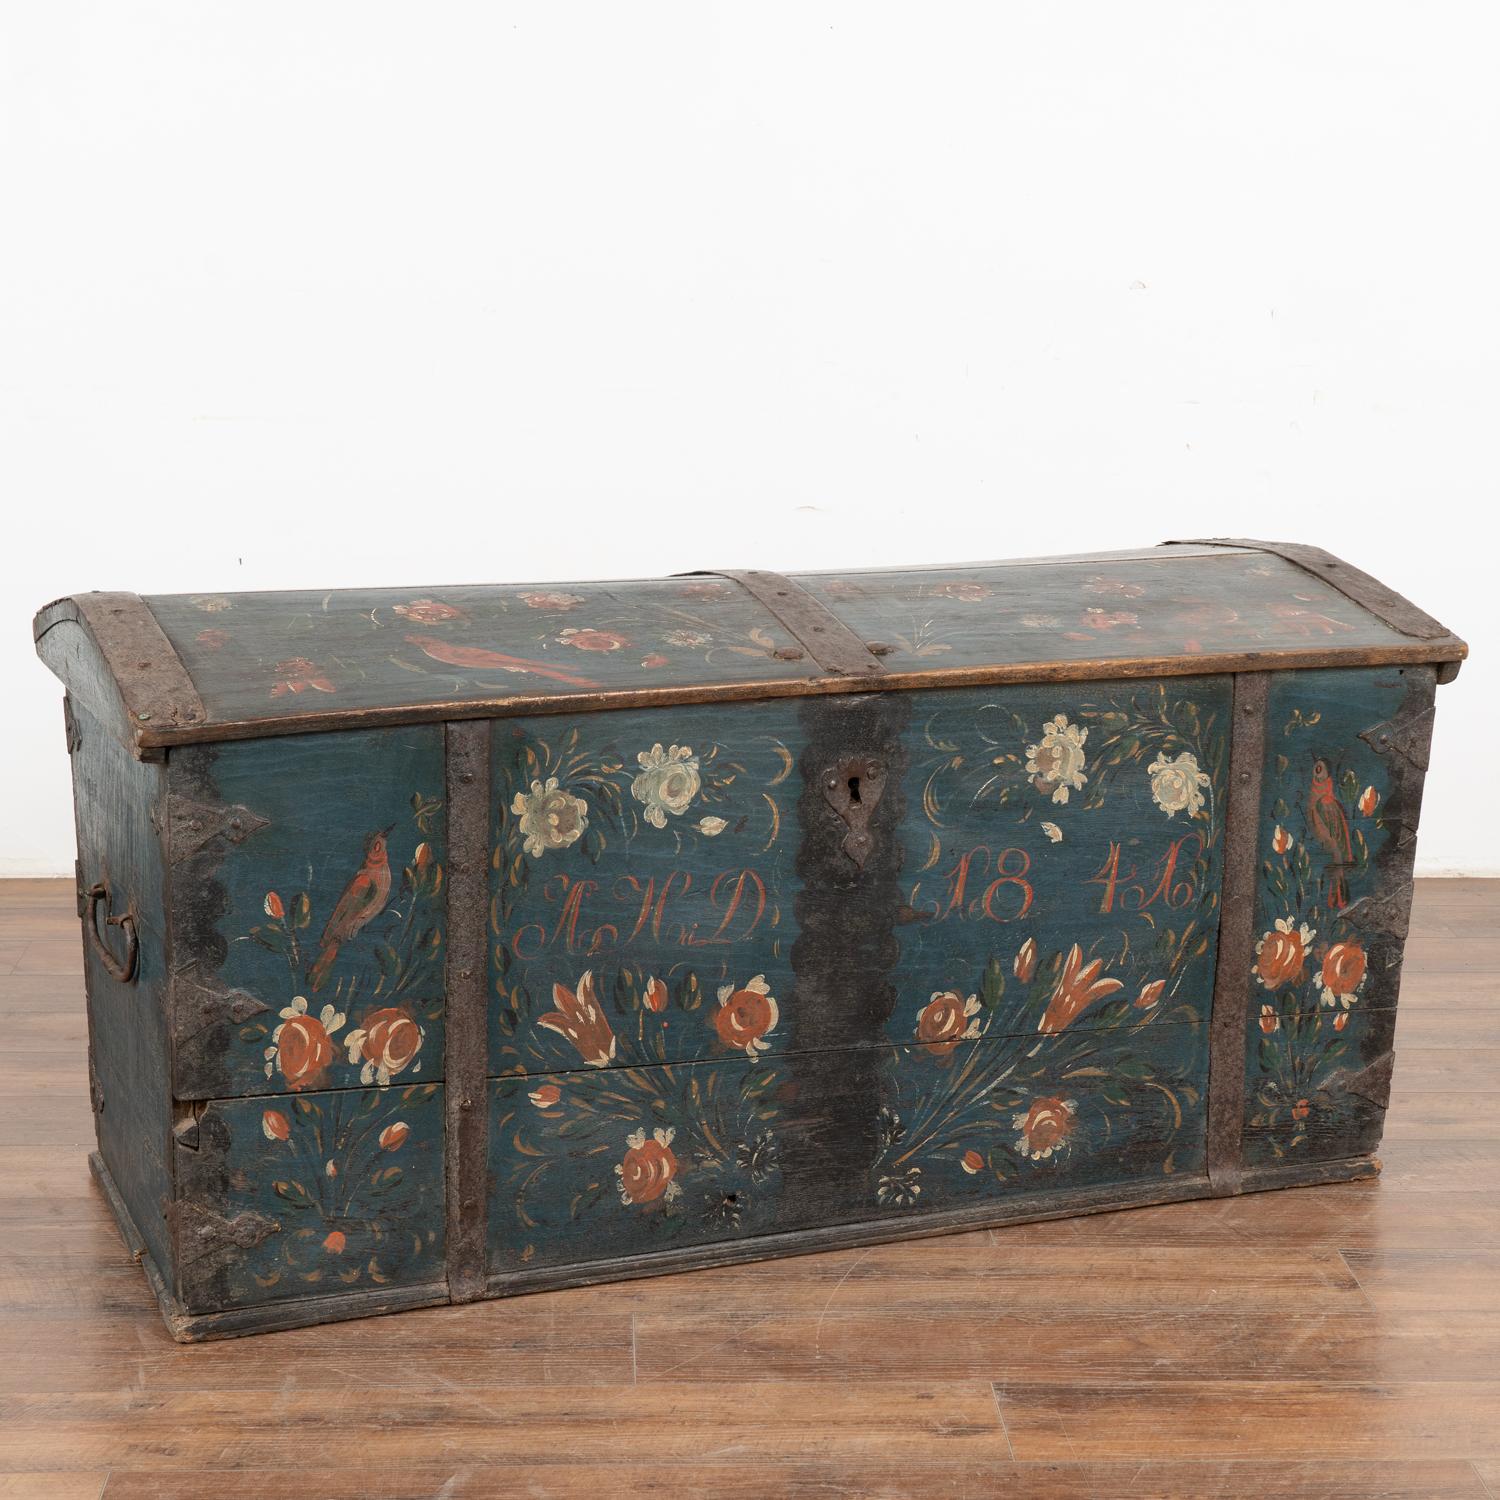 Original blue painted dome top oak trunk from Sweden with traditional hand-painted details including beautiful bird and floral motif along top and front.
Monogram of AHD and date 